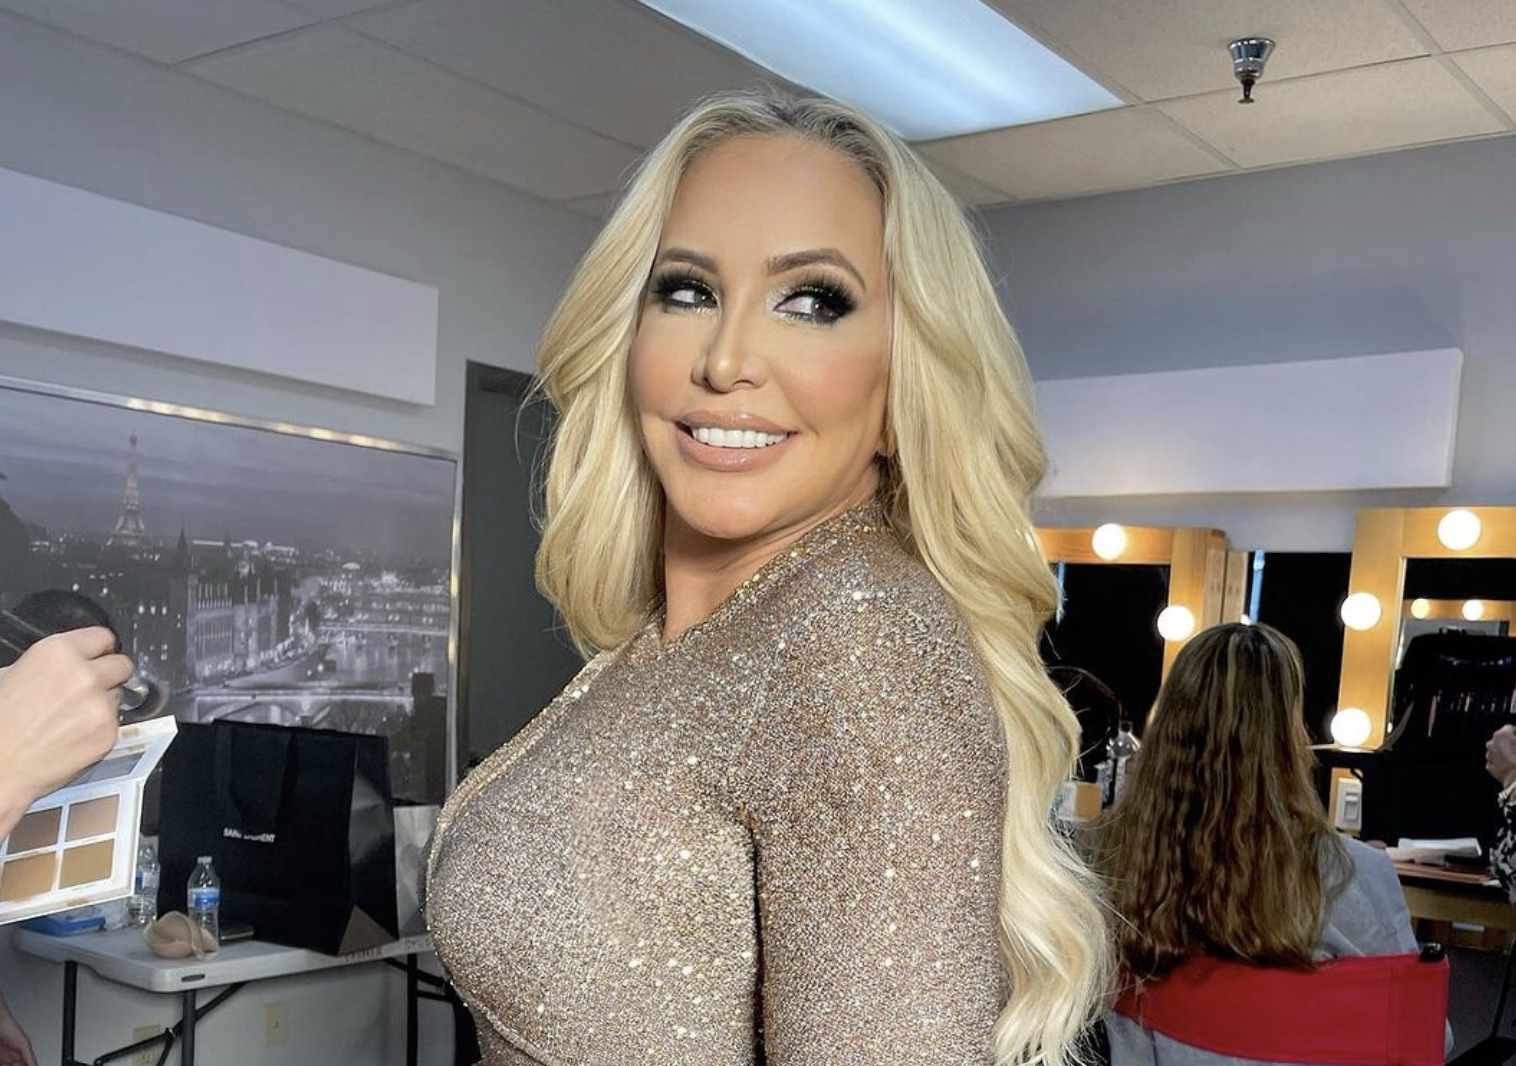 Real Housewives Cast Share Their Shock Over Shannon Beador's Arrest